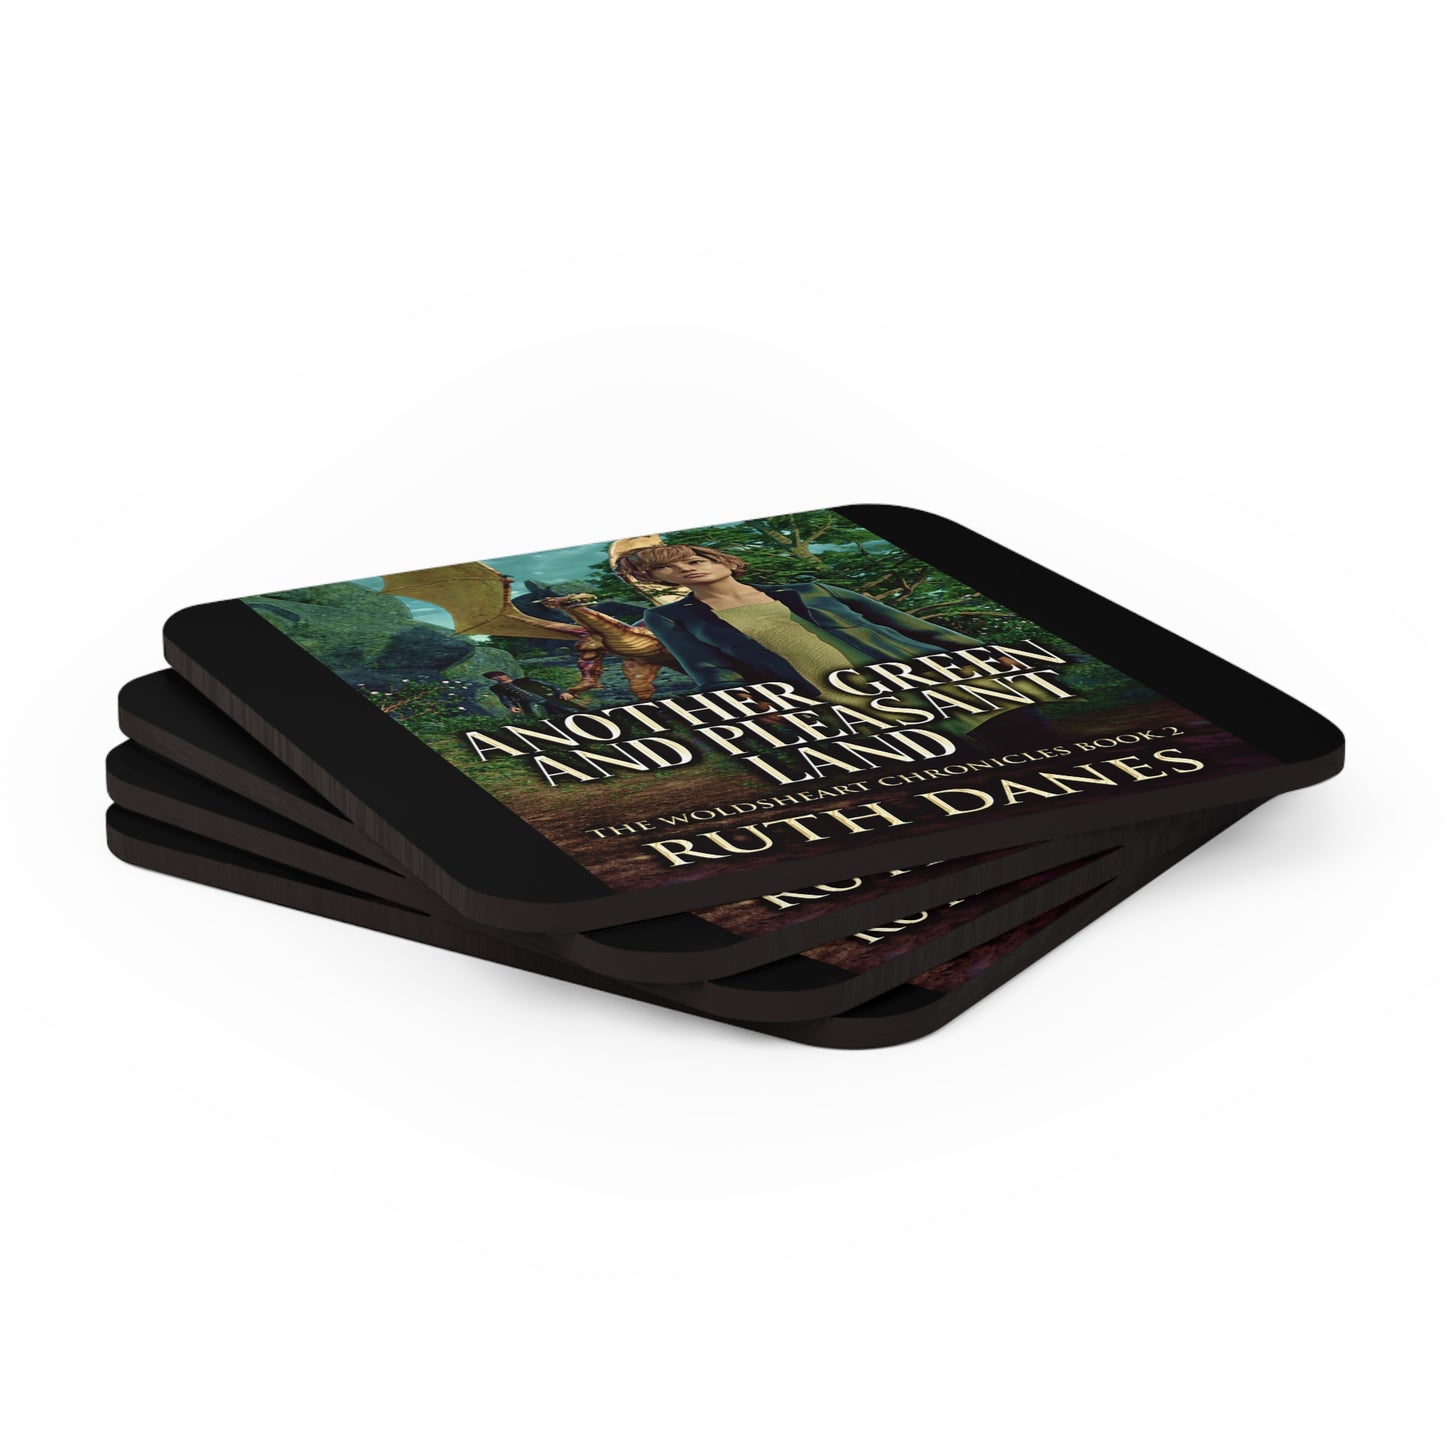 Another Green and Pleasant Land - Corkwood Coaster Set